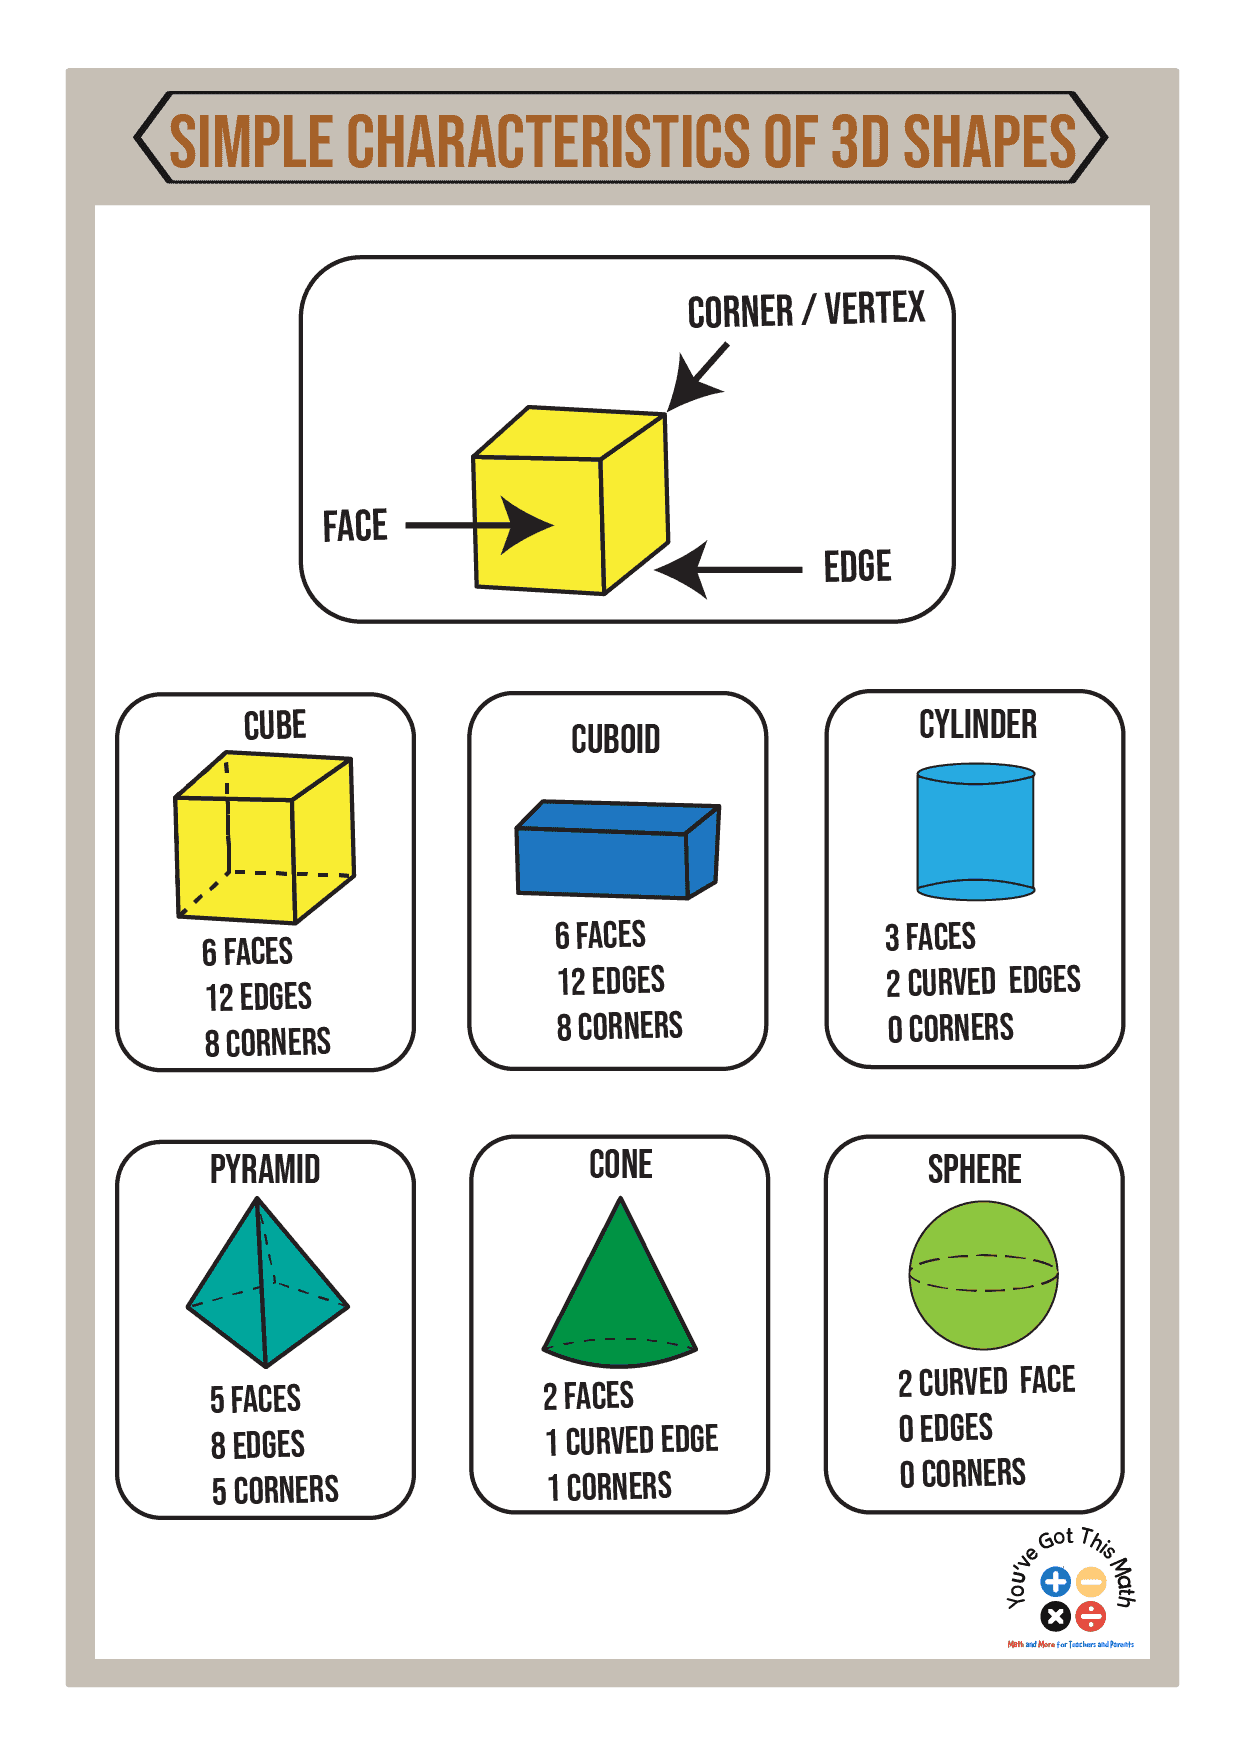 Simple Characteristics of 3D Shapes anchor chart